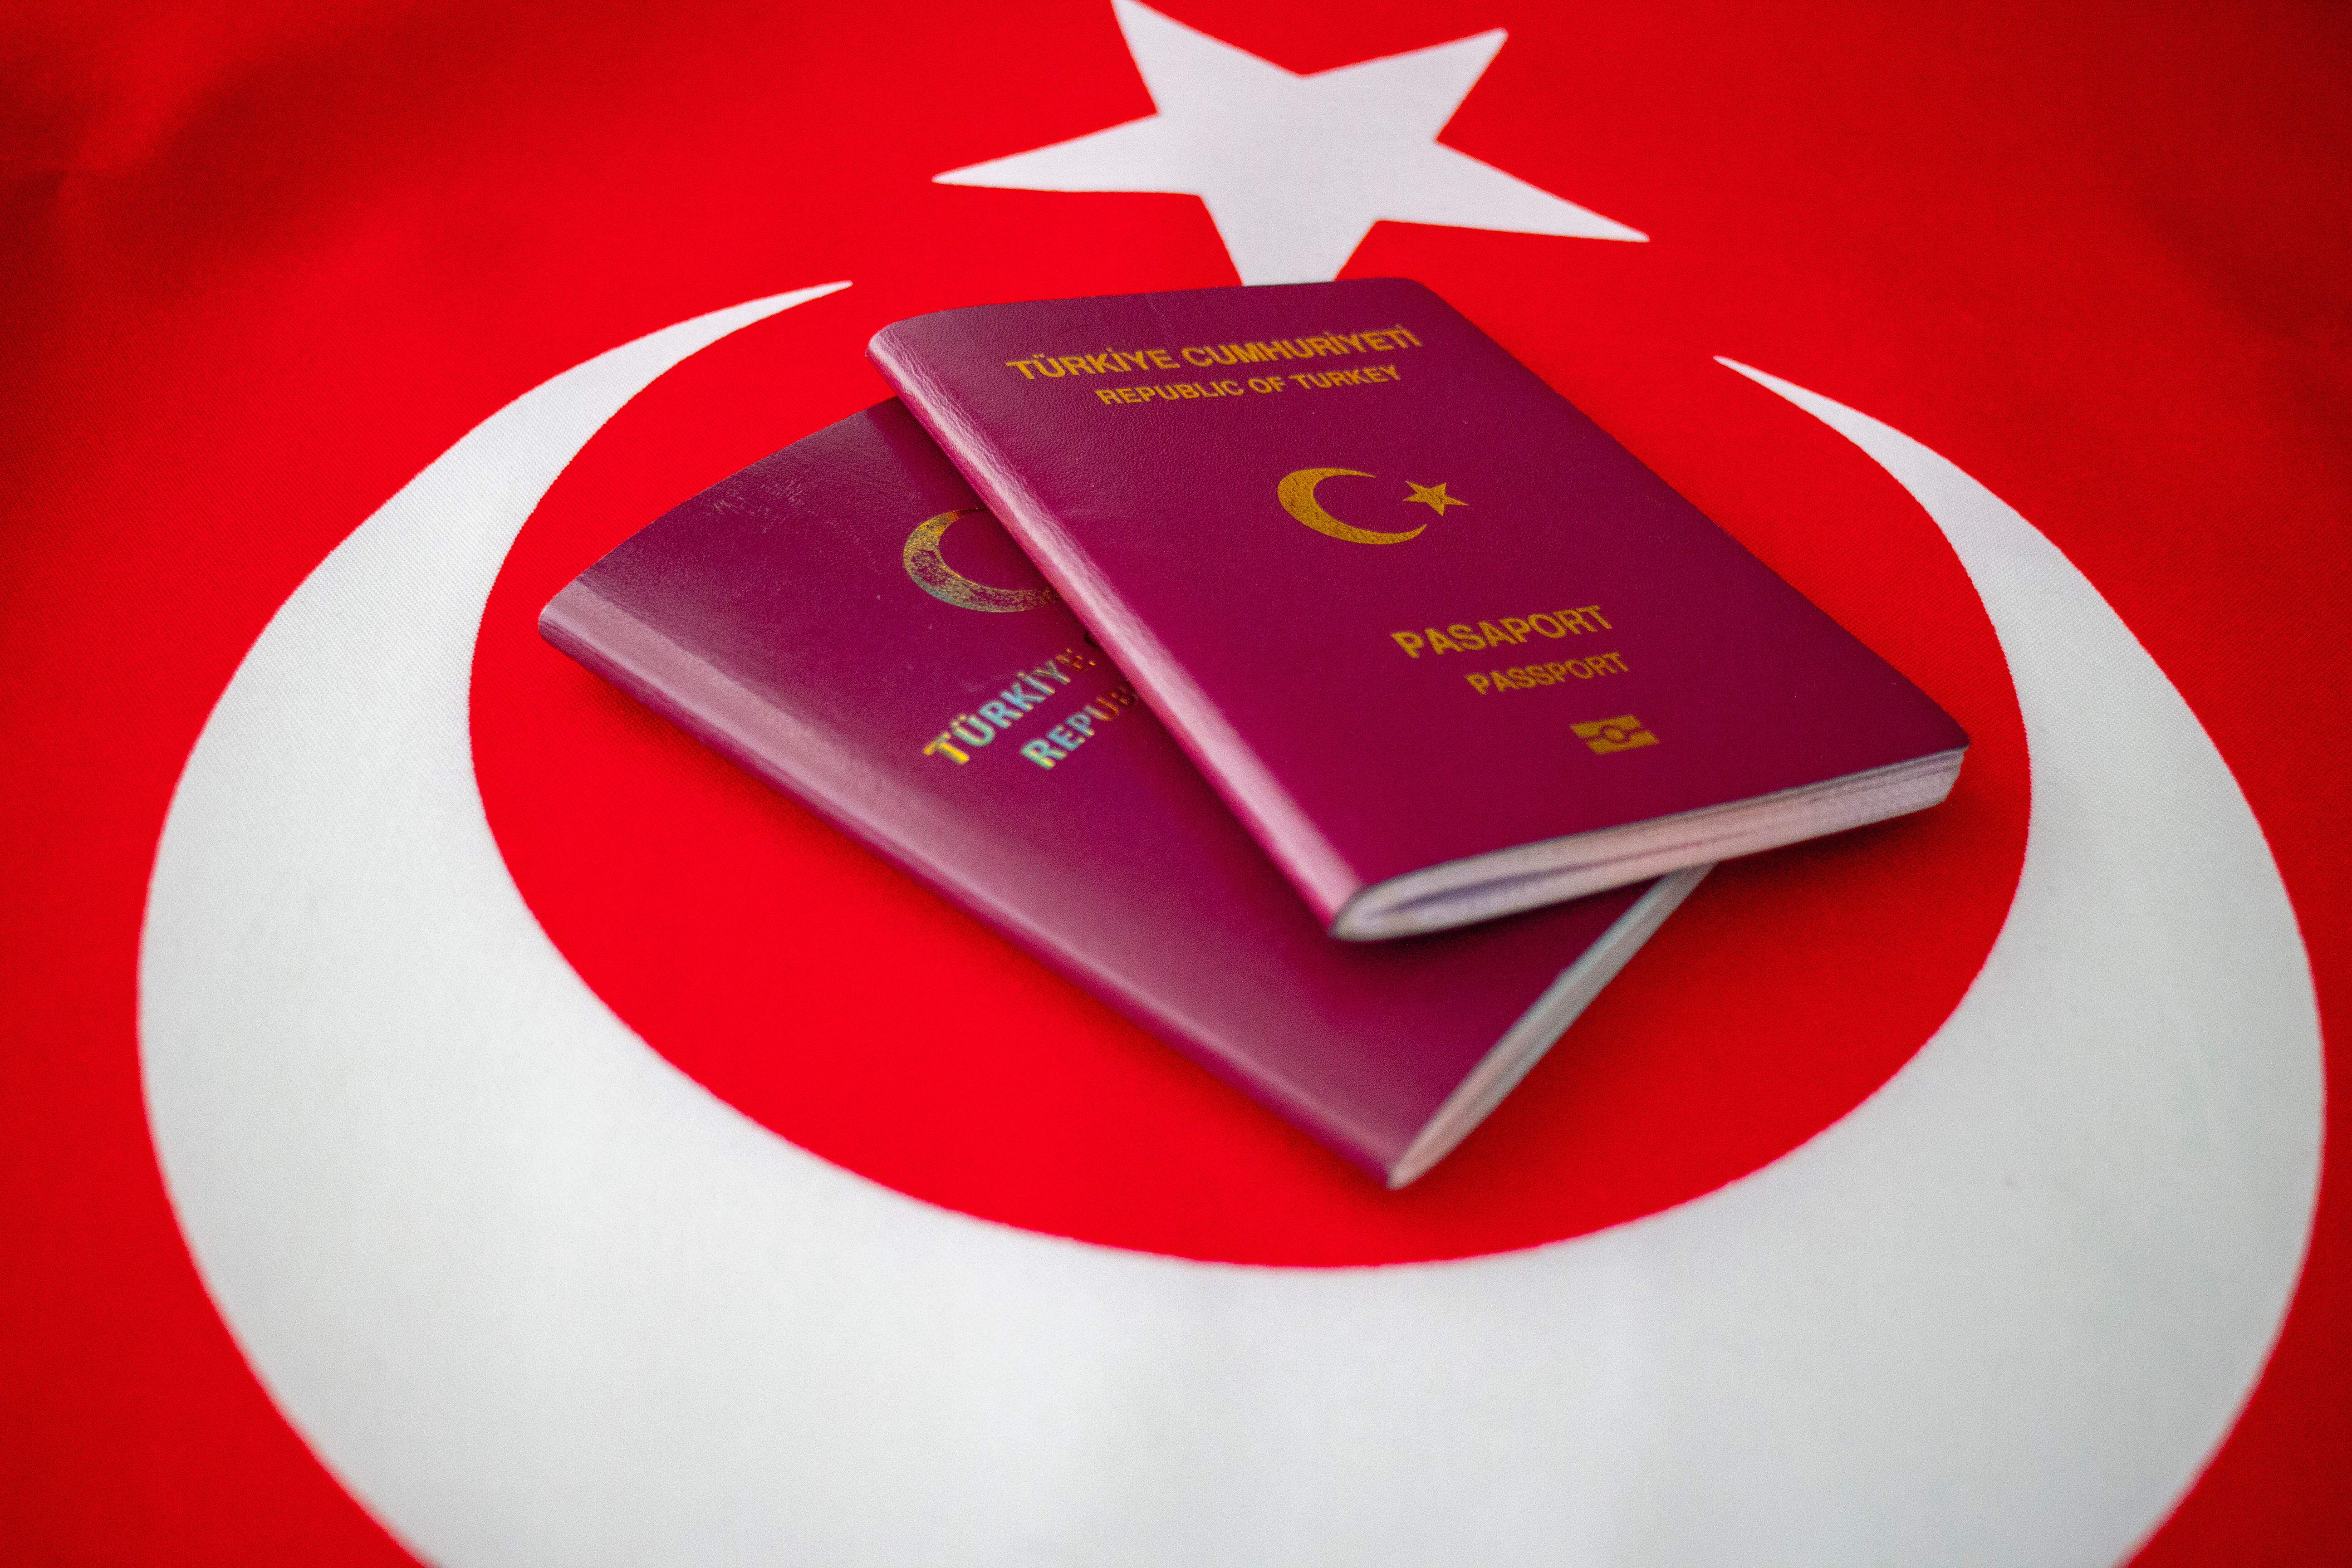 Passports on the Turkish flag symbolize Turkish citizenship by investment